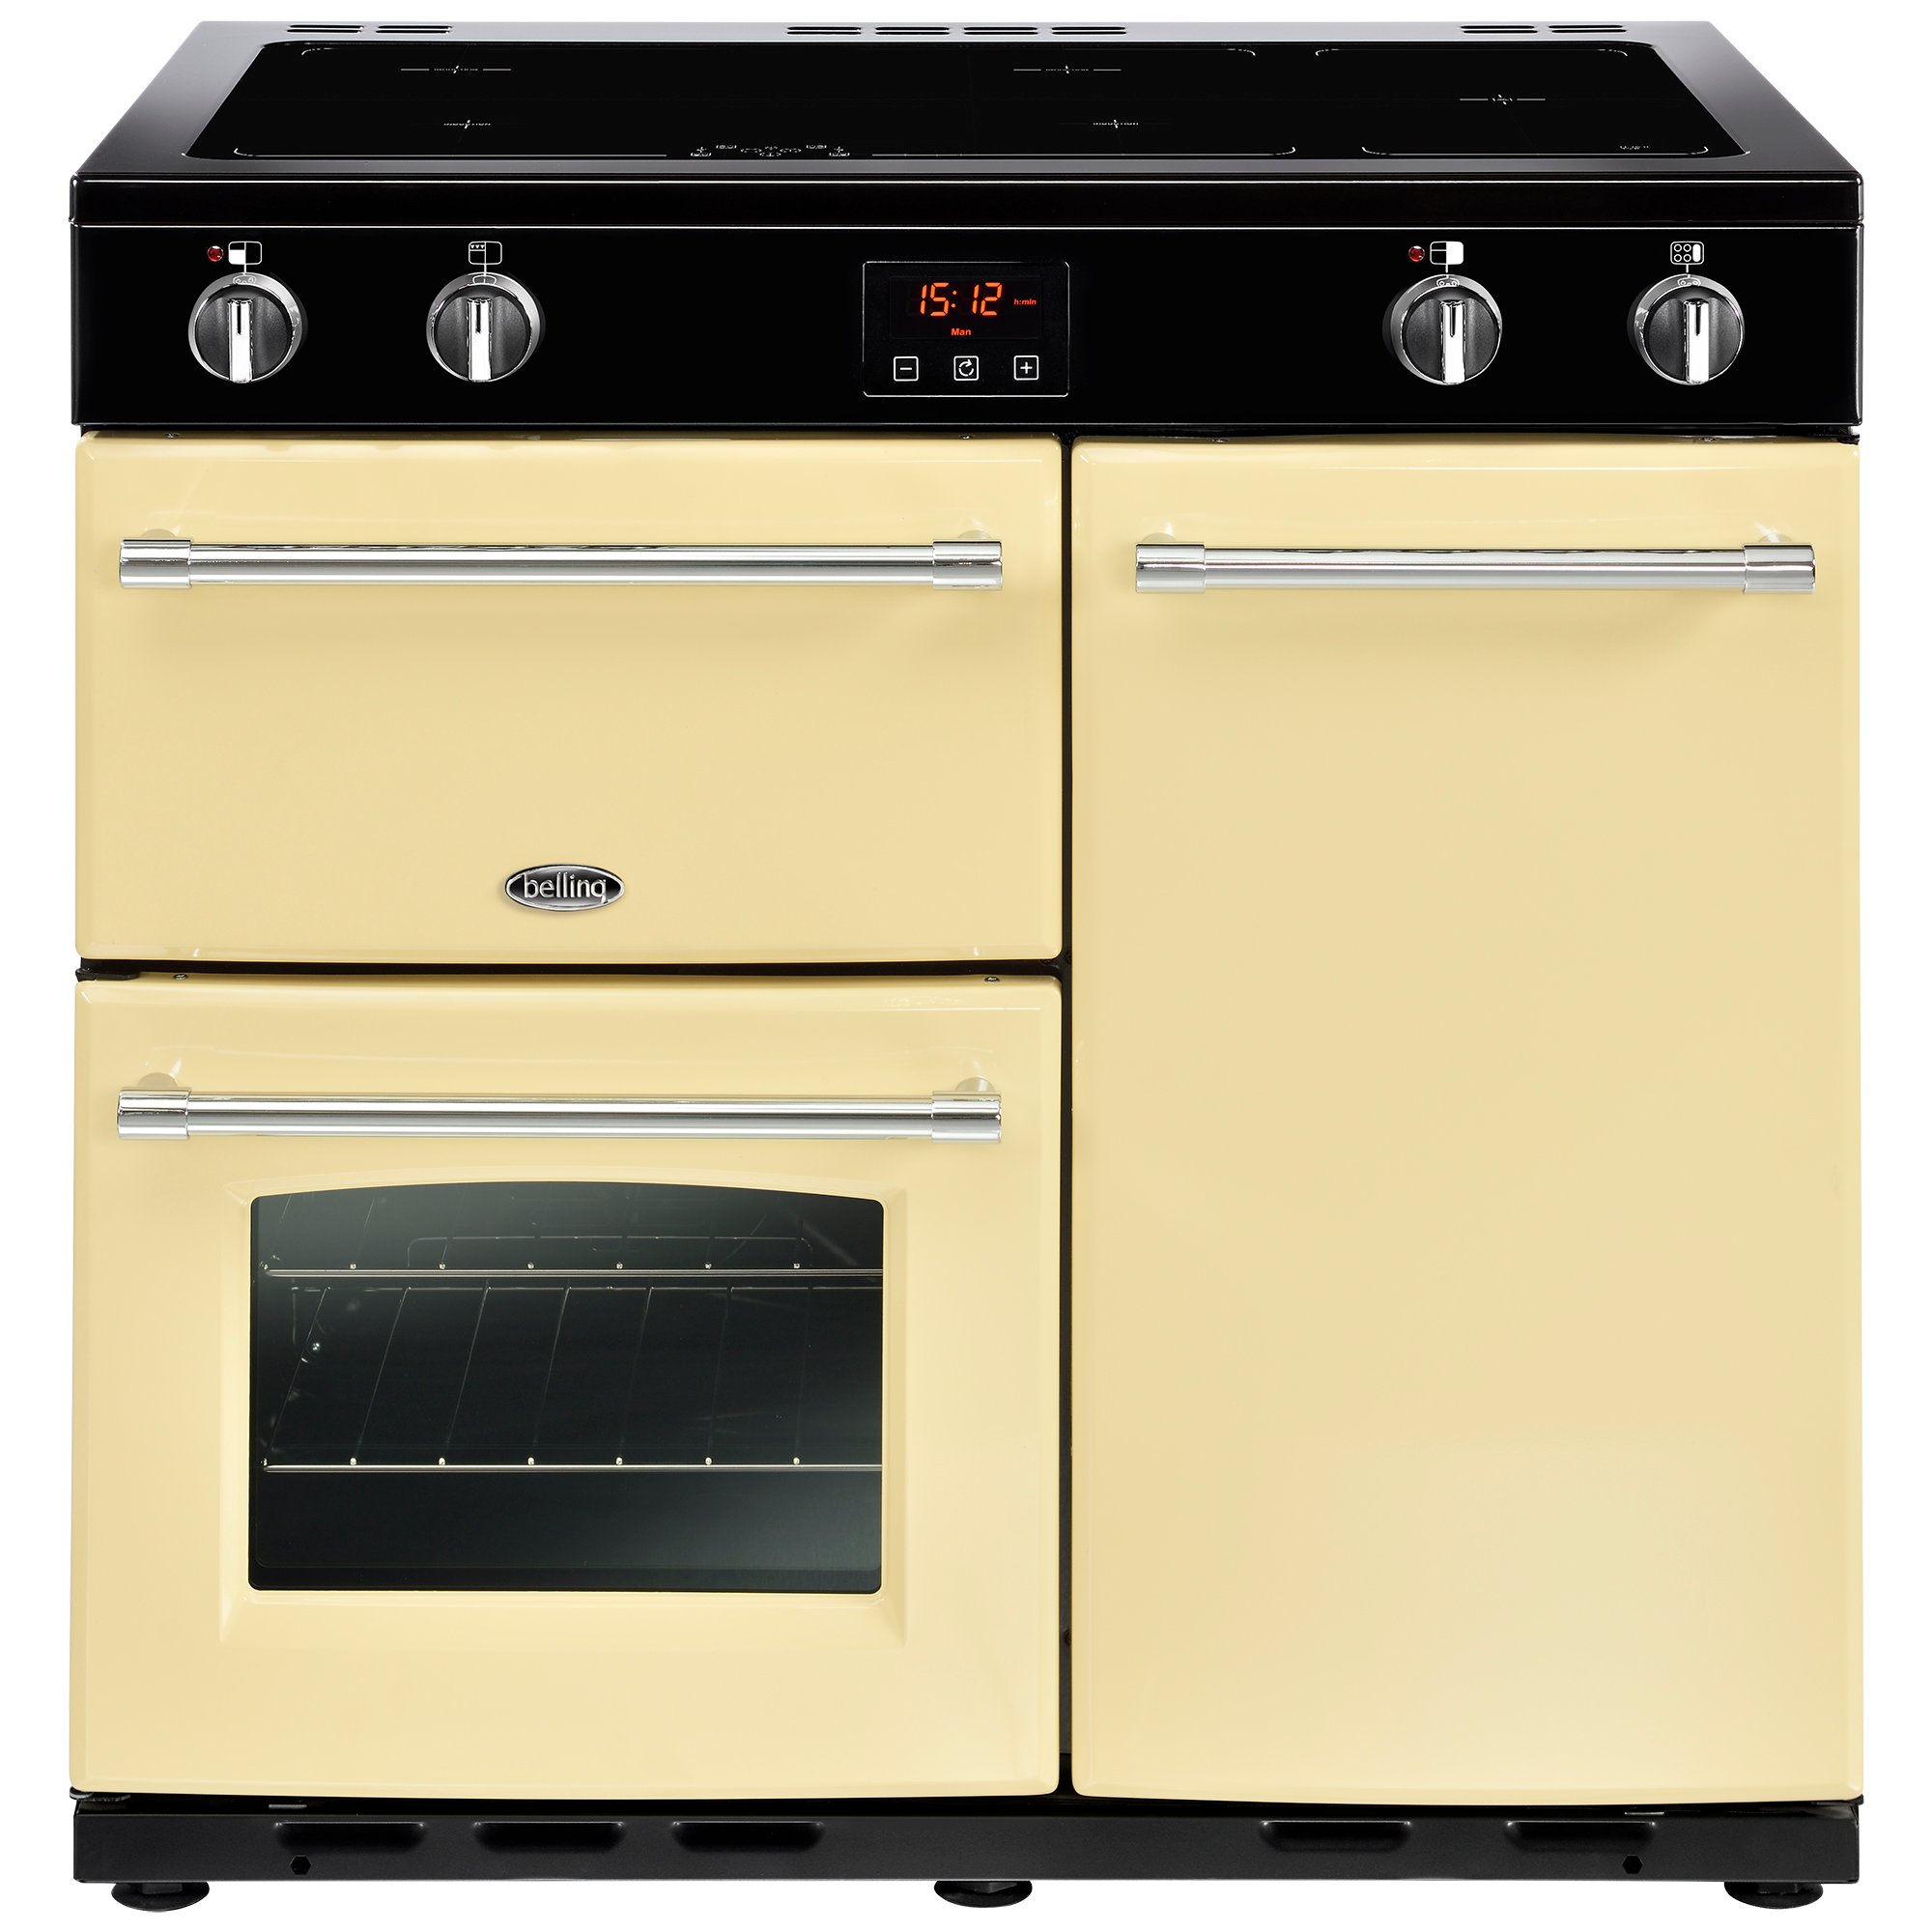 90cm electric range cooker with induction, Maxi-Clock, 91 litre market leading tall oven and easy clean enamel. Requires 32A connection.